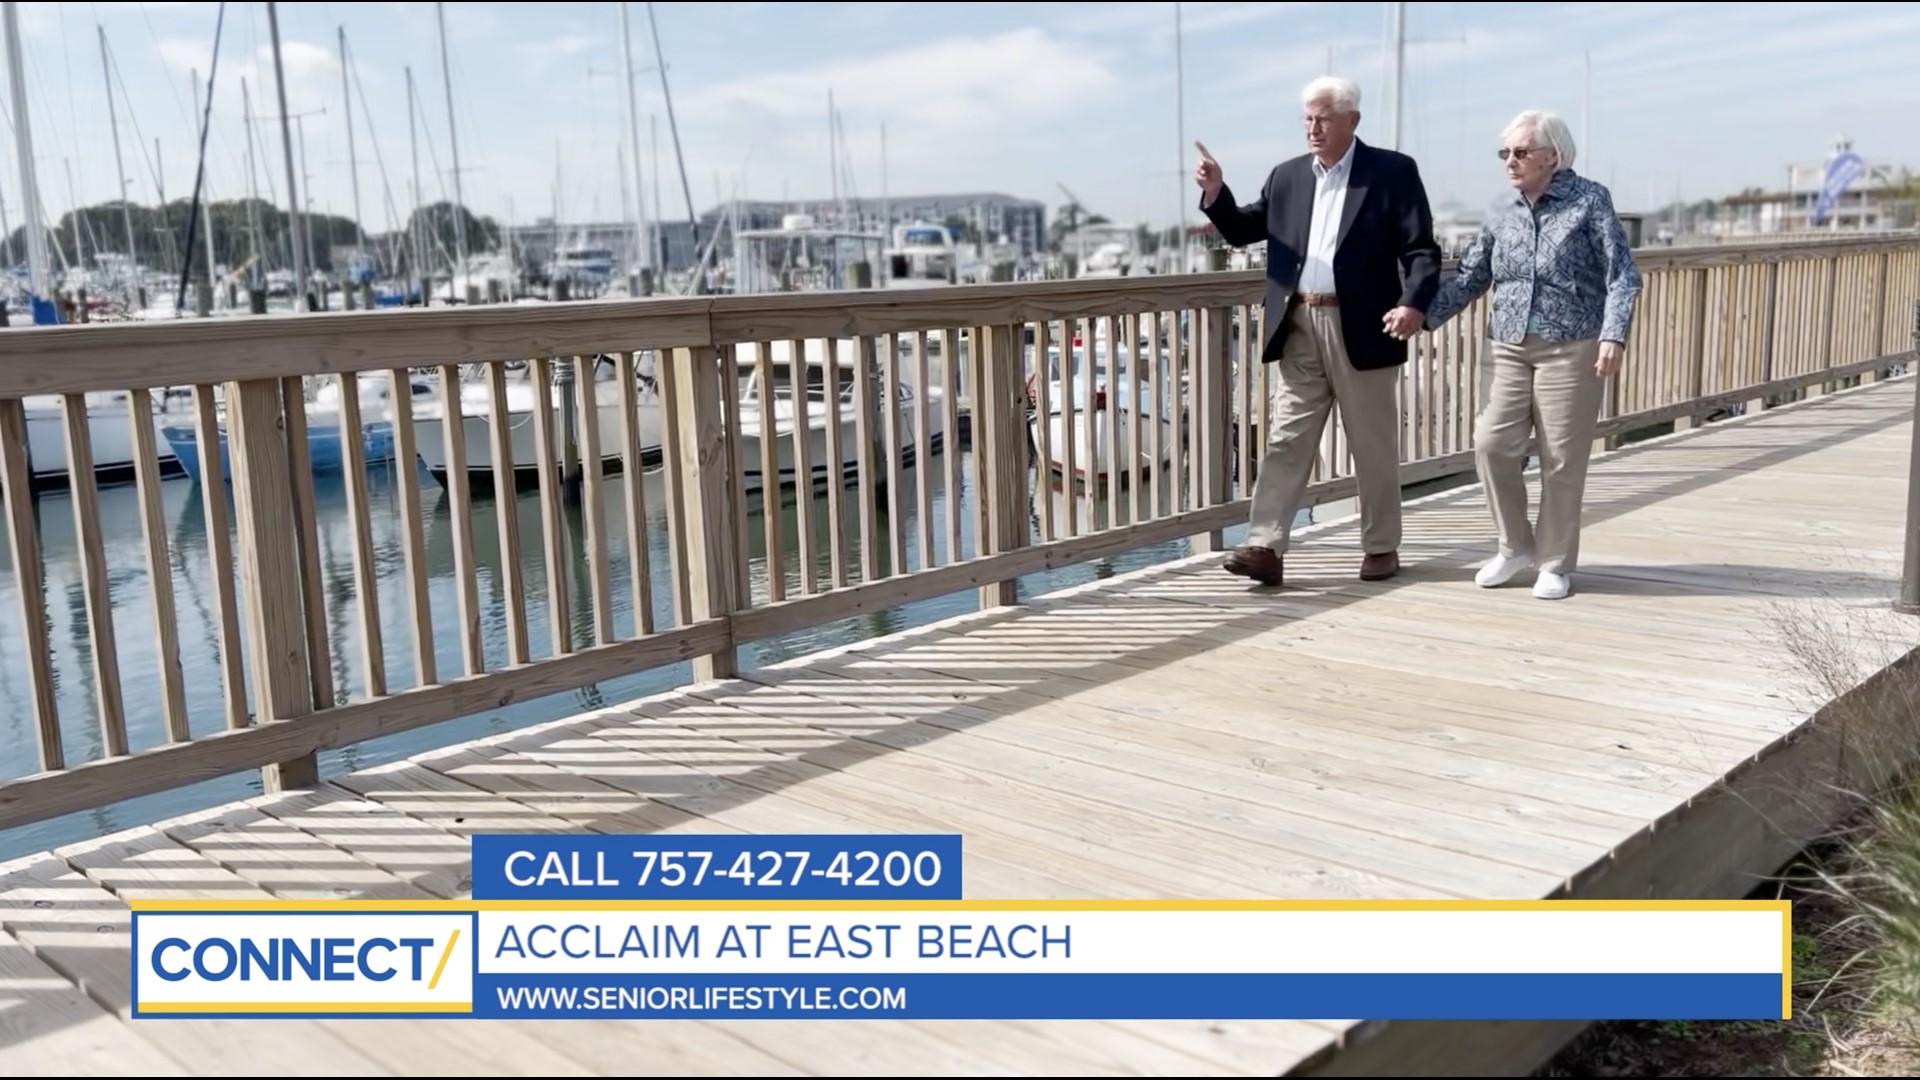 Acclaim at East Beach residents enjoy resort-style living with services that help make life hassle-free. Call today to set up a visit!